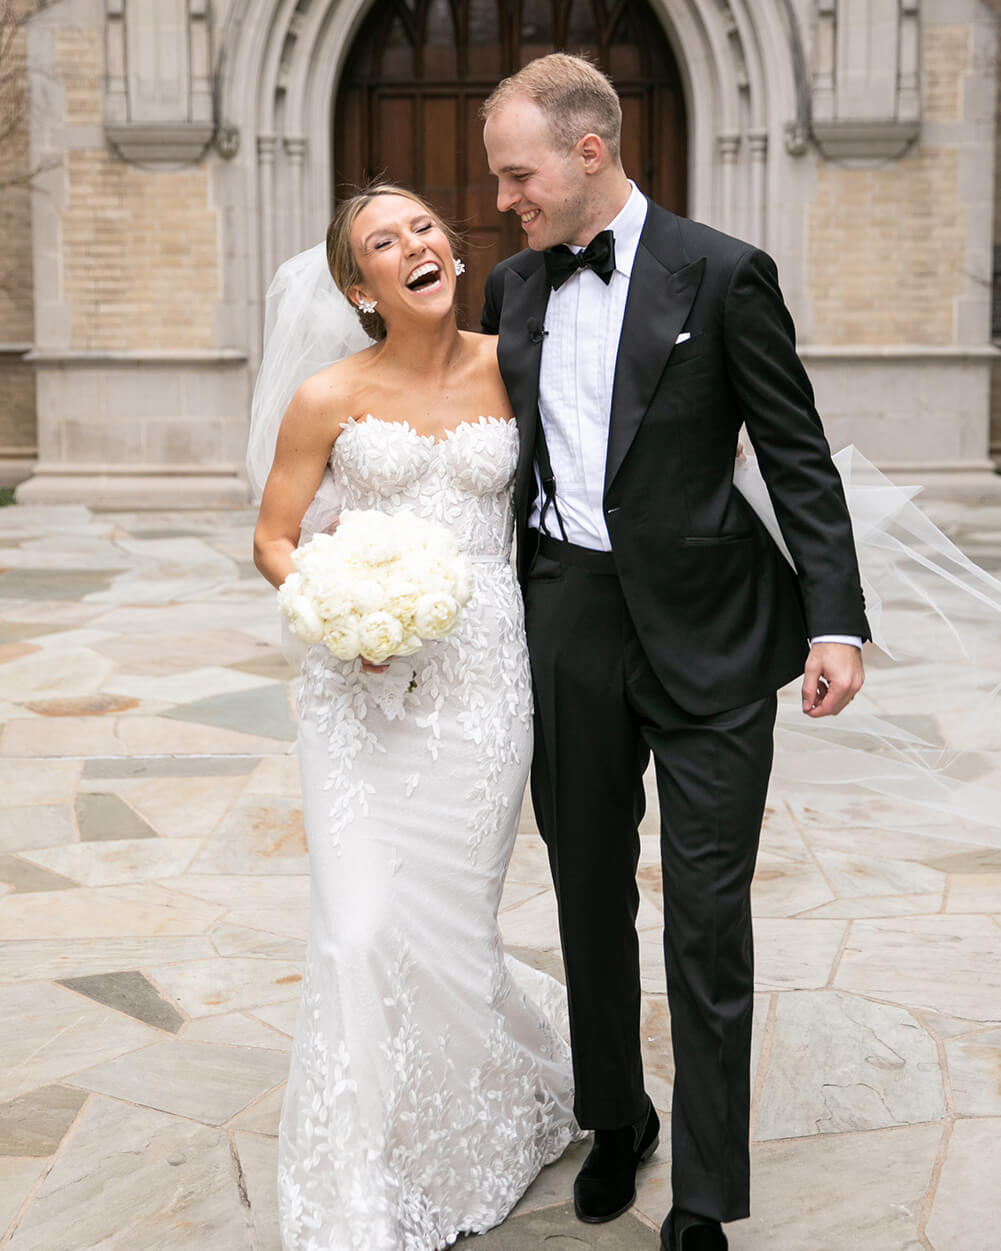 Our Photographers’ Favorite Wedding Moment to Capture